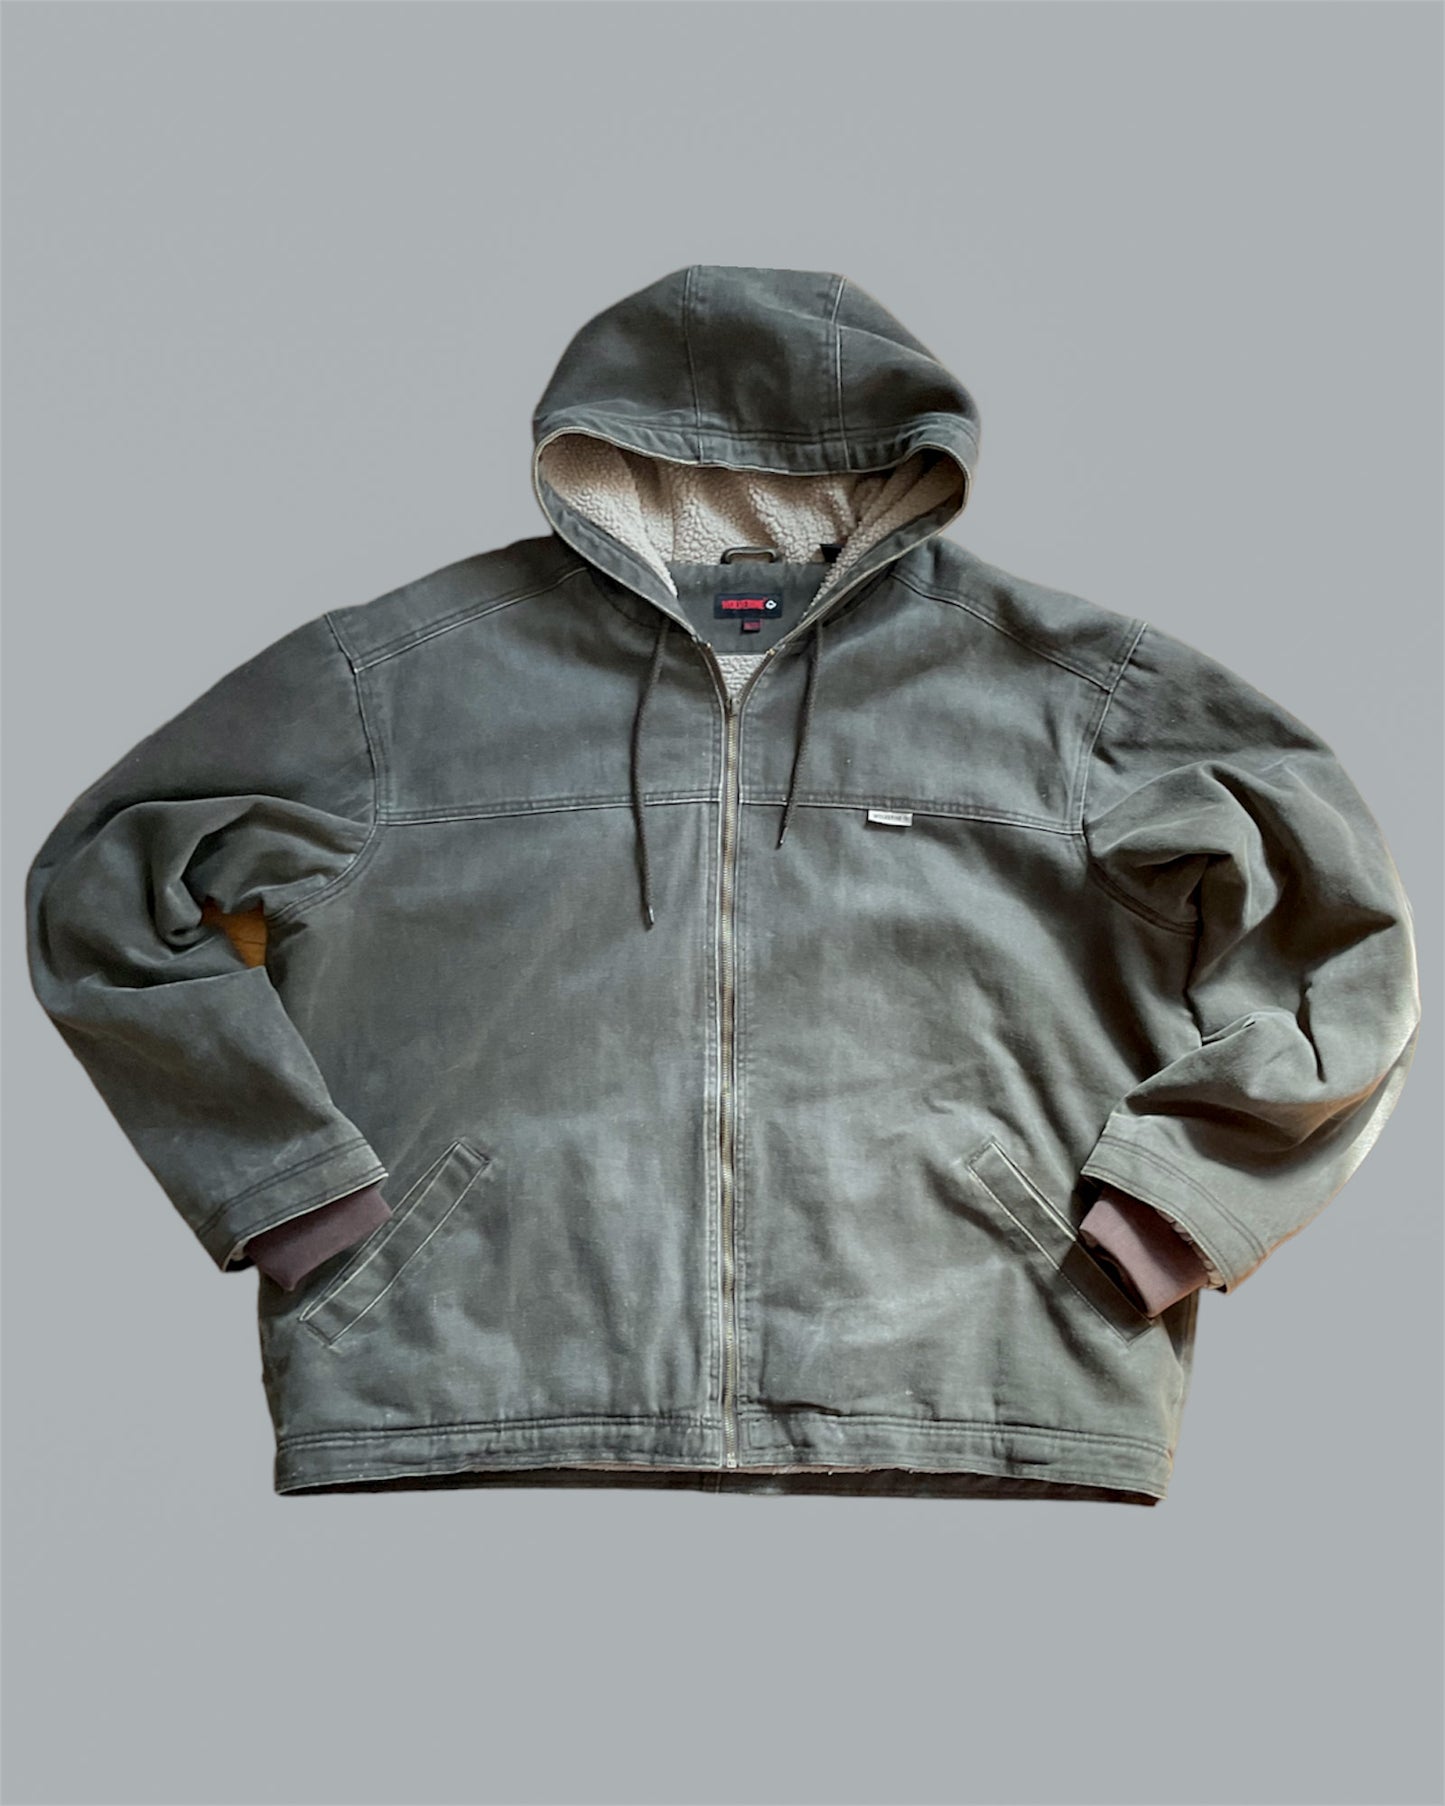 Wolverine Canvas and Sherpa Lined Jacket